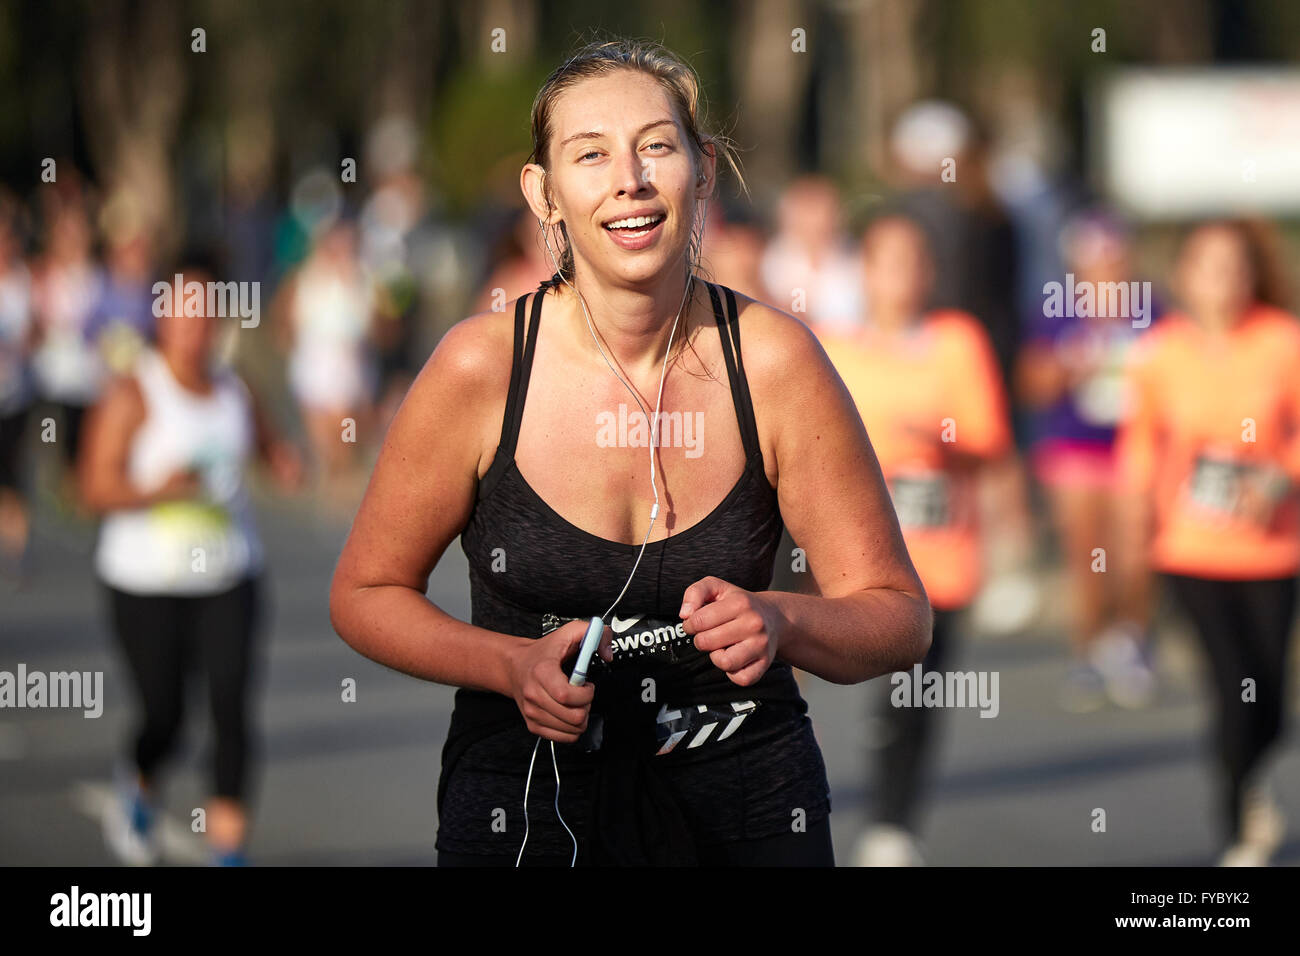 Relief Showing On A Female Athlete Running In The Nike Woman's Half Marathon, San Francisco, 2015. Stock Photo